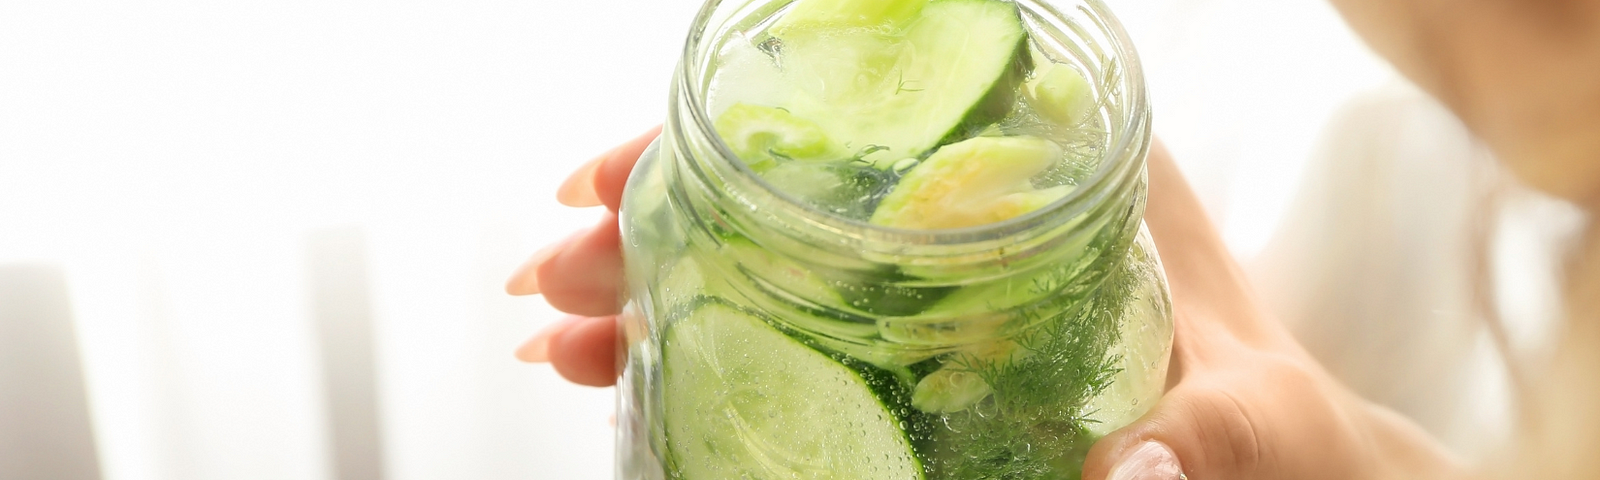 Woman’s hands holding a mason jar full of water with a whole cucumber sliced in